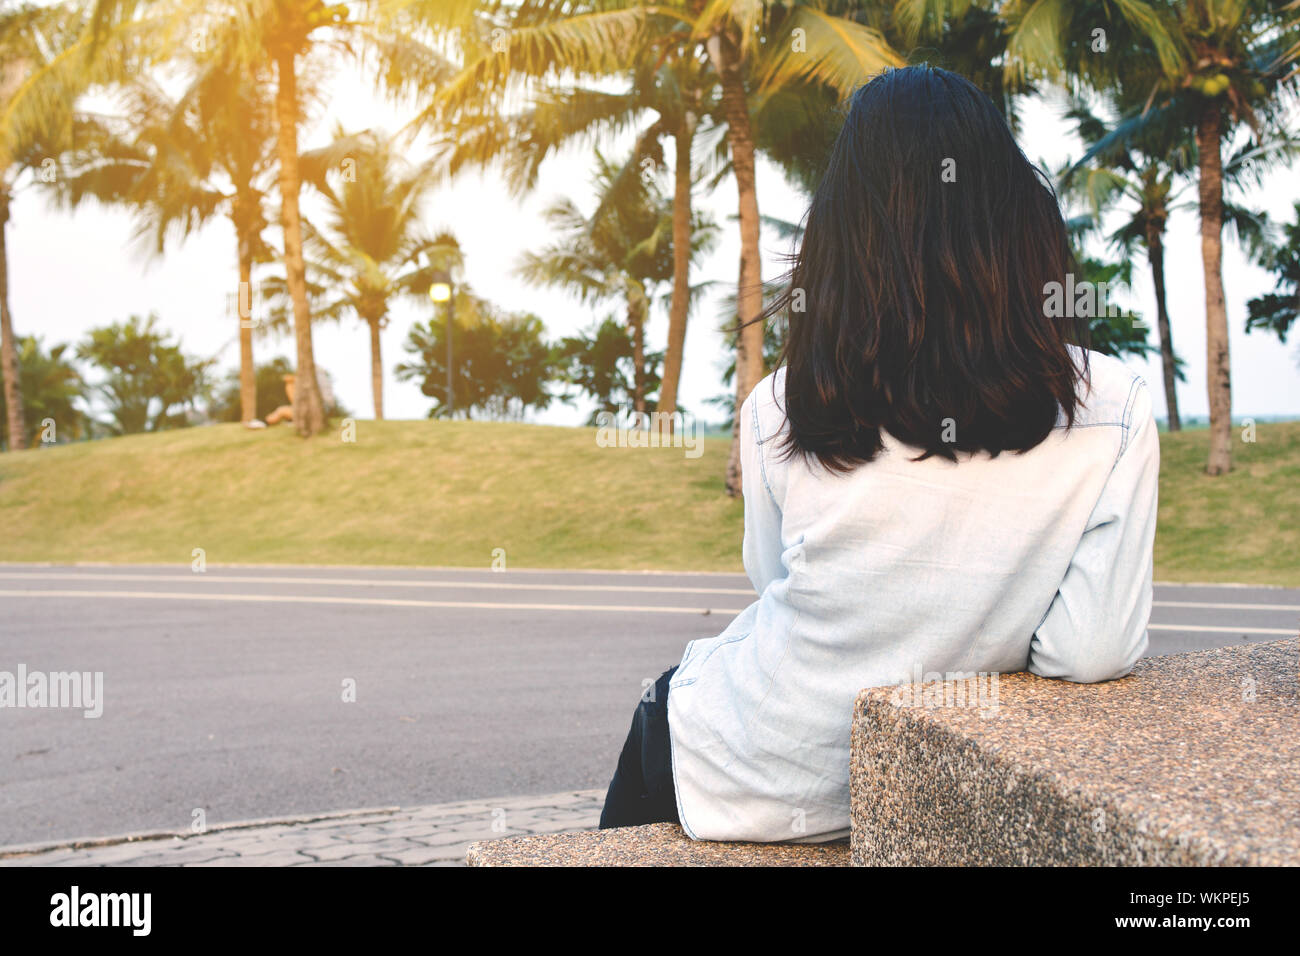 Rear View Of Woman With Black Hair Sitting On Steps By Road Against Palm Trees Stock Photo